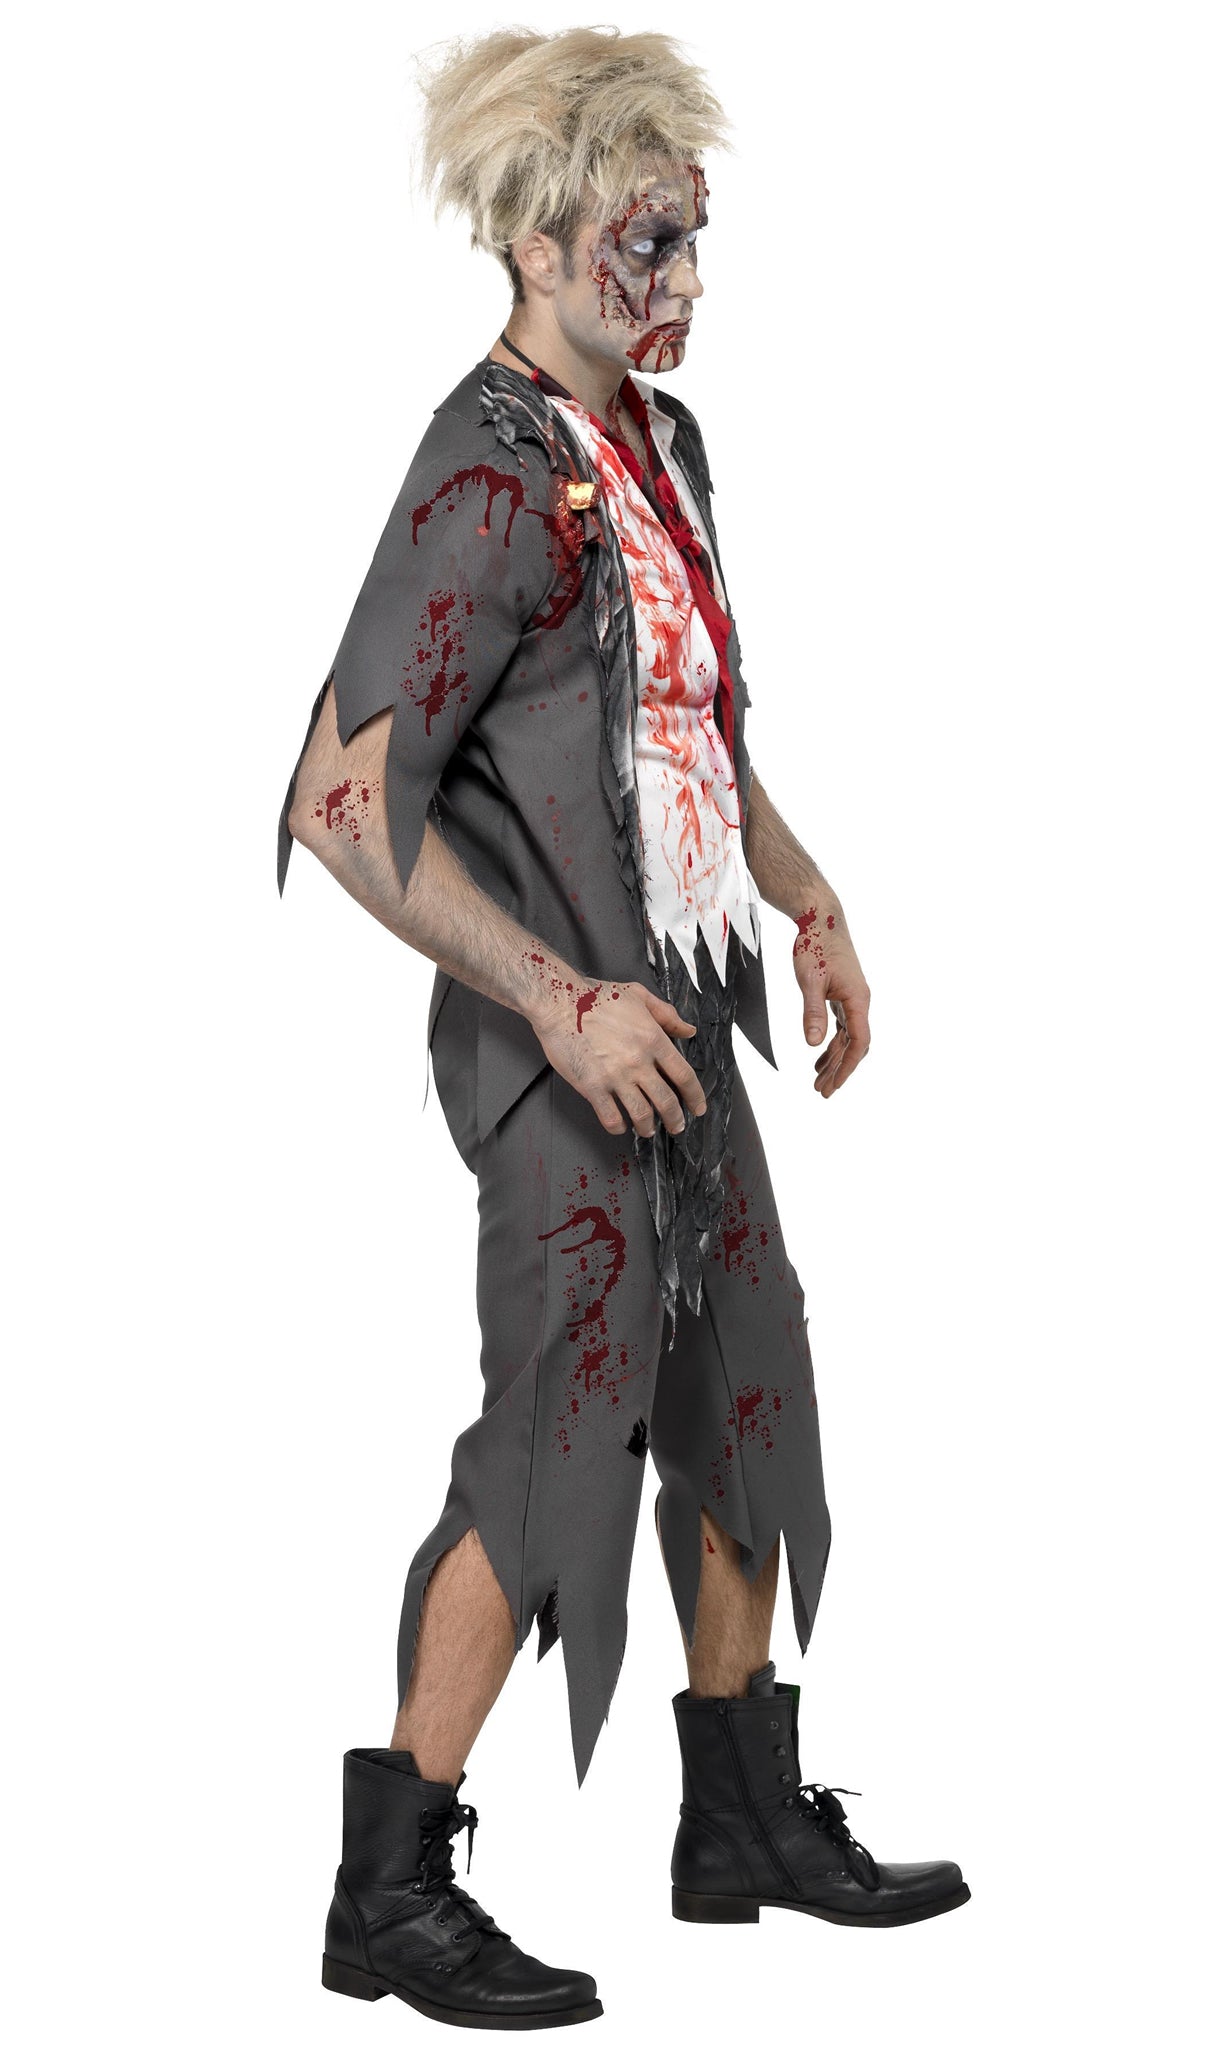 Side of zombie school boy costume with tie and blood splatters